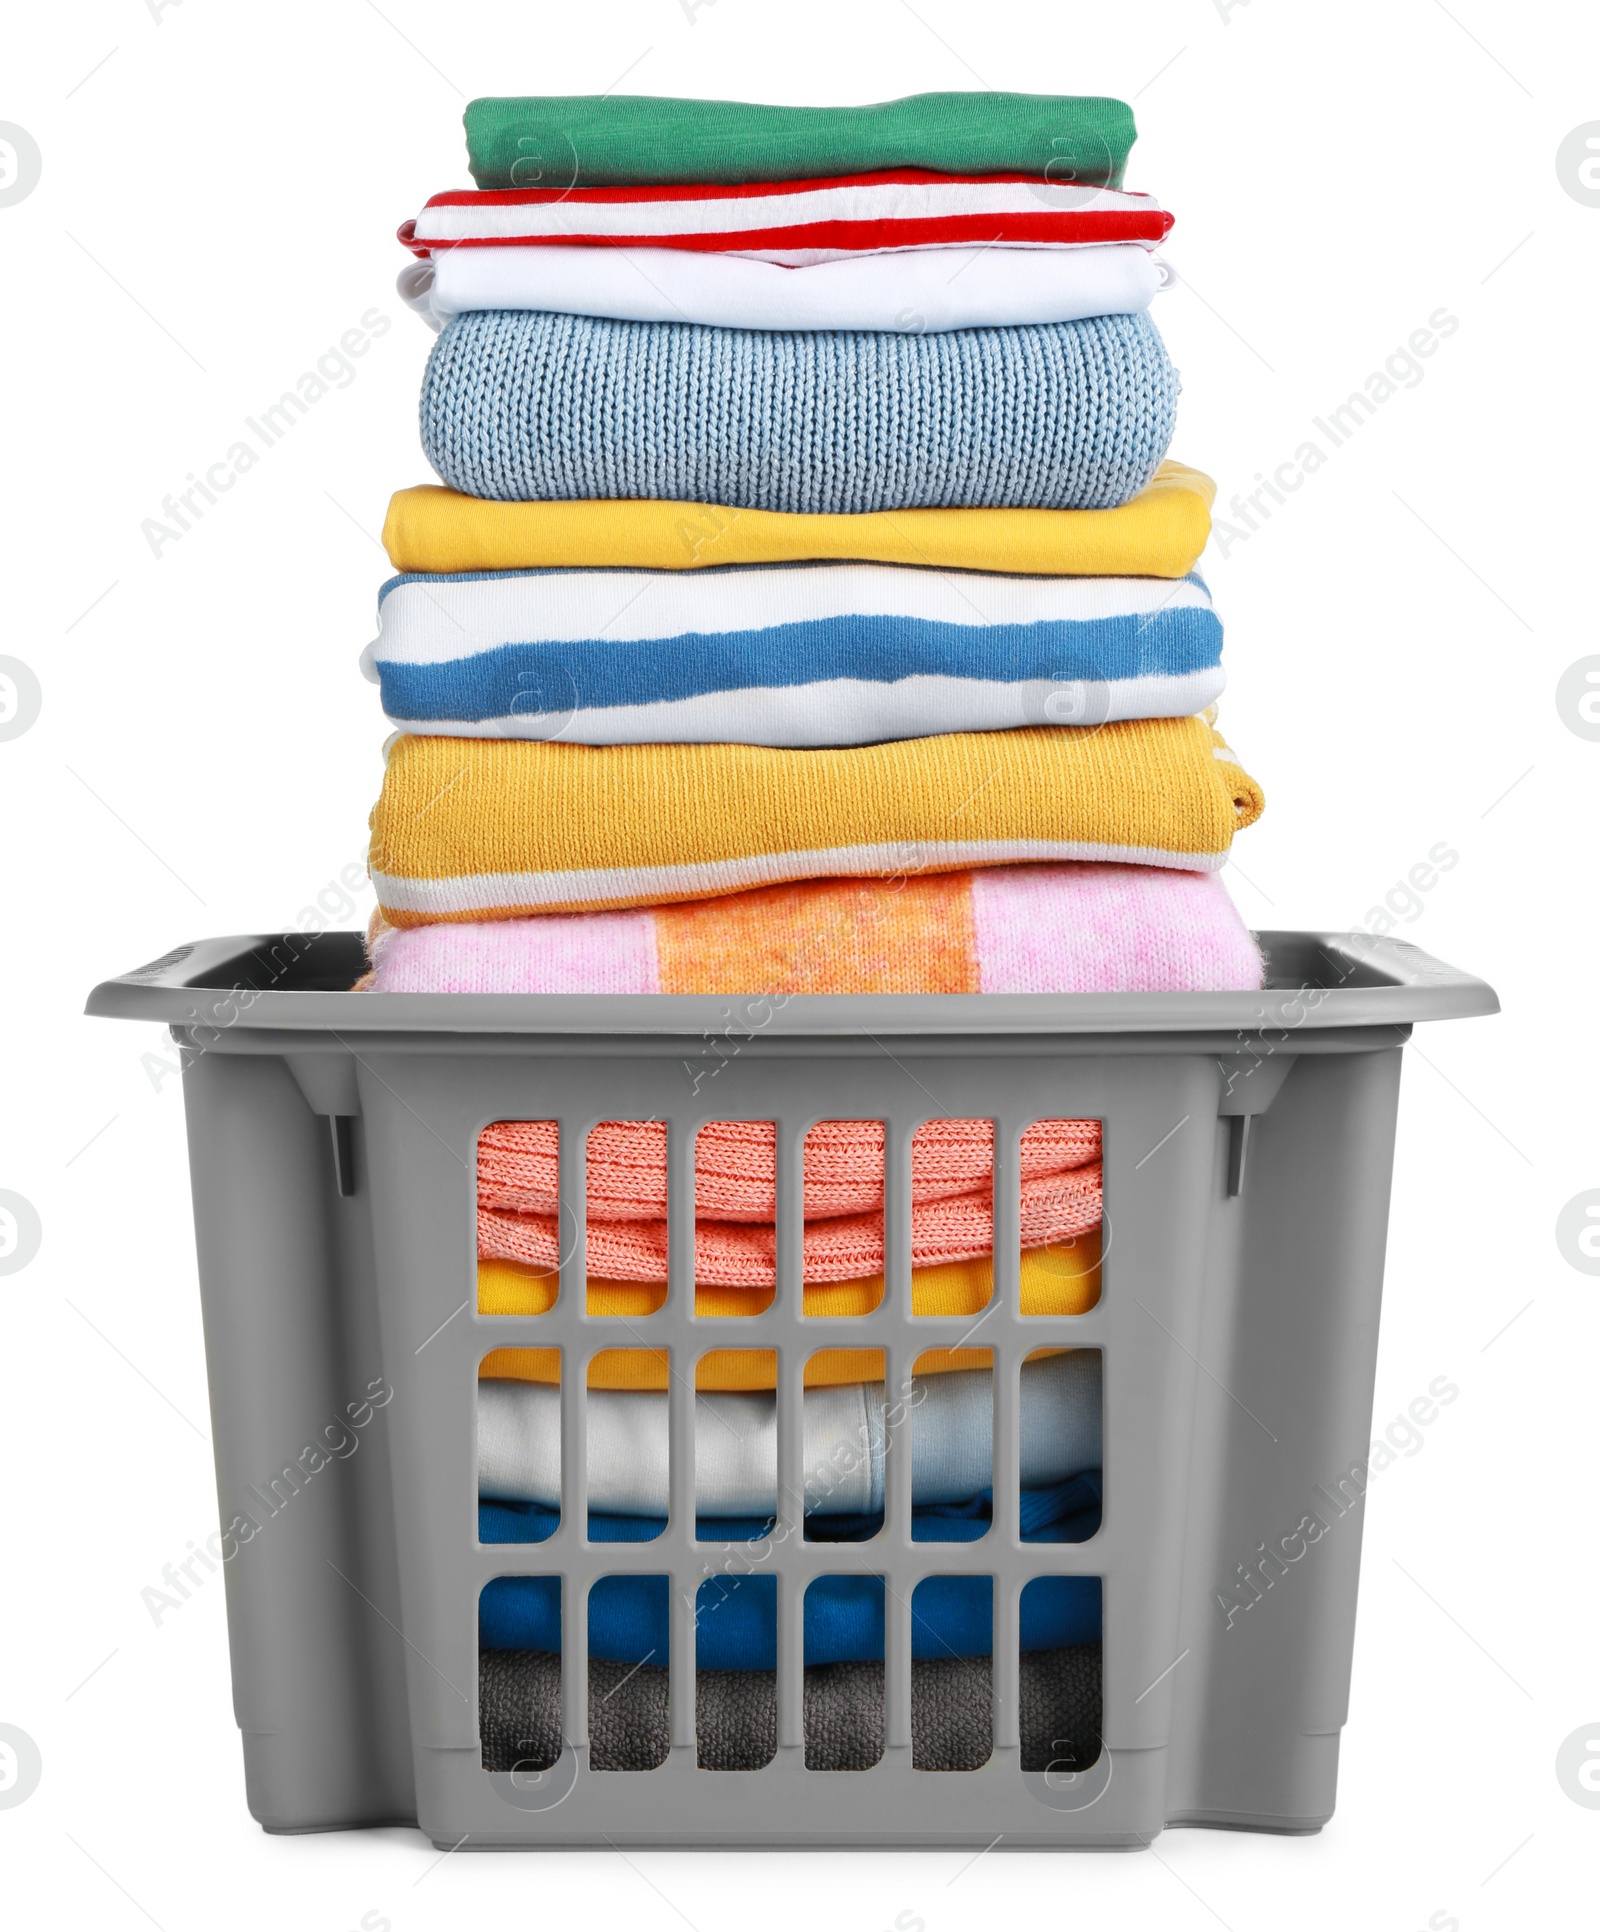 Photo of Plastic laundry basket with clean clothes isolated on white